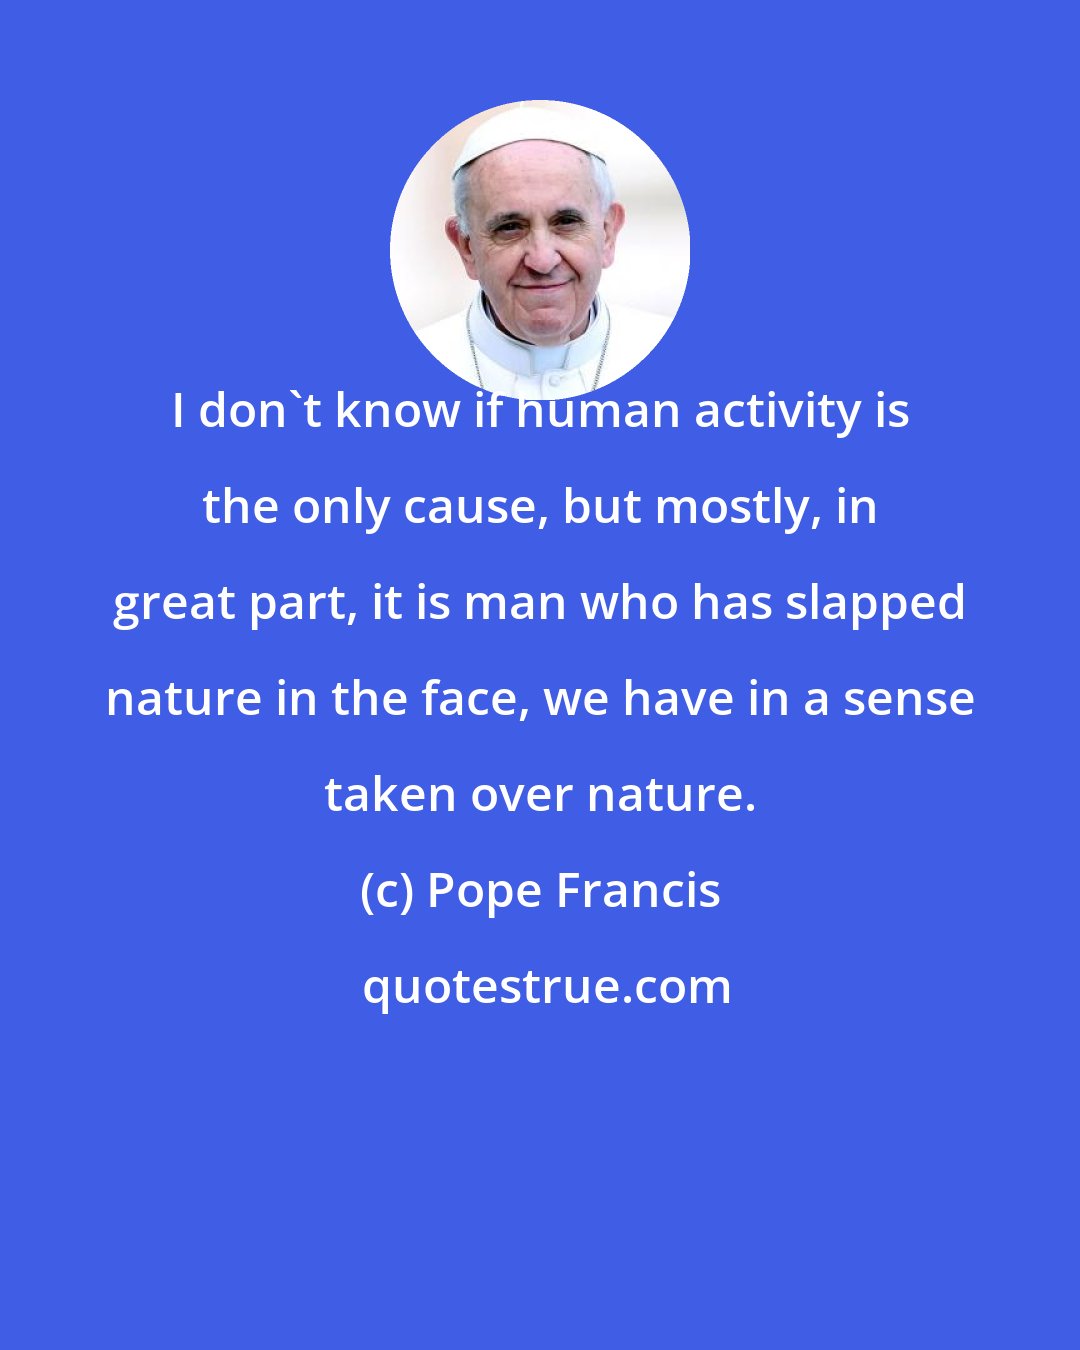 Pope Francis: I don't know if human activity is the only cause, but mostly, in great part, it is man who has slapped nature in the face, we have in a sense taken over nature.